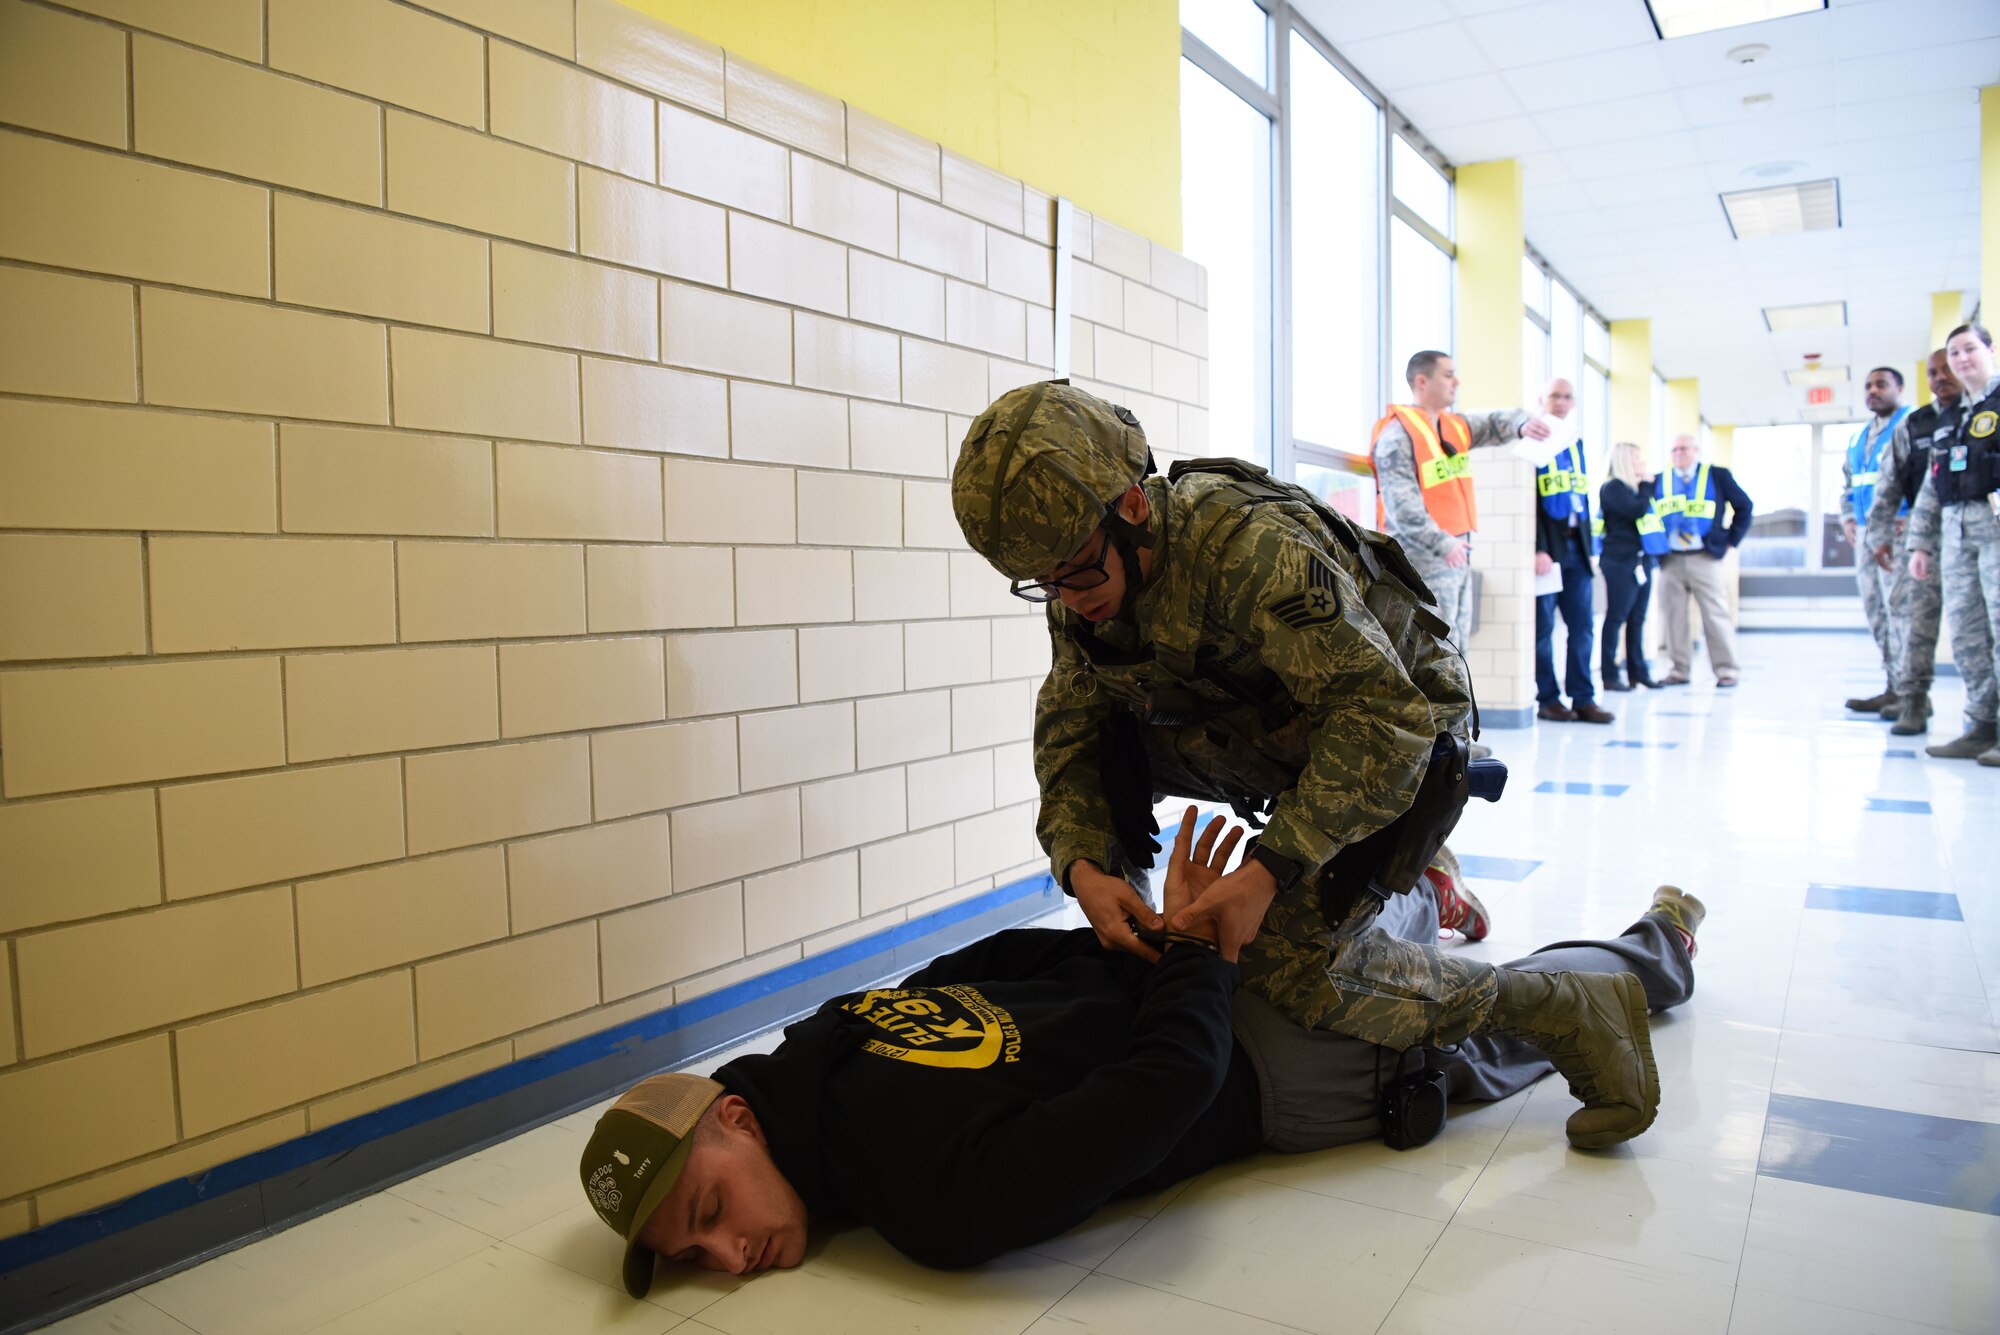 Staff Sgt. Bernard Pecoraro, 436th Security Forces Squadron military working dog handler, is handcuffed by Staff Sgt. Samuel Cruz-Santiago, 436th SFS defender, during the semi-annual active shooter exercise Feb. 26, 2018, at the George S. Welch Elementary School and Dover Air Force Base Middle School on Dover AFB, Del. Members of the 436th Airlift Wing Inspector General team, 436th SFS and the school district spent three months preparing for the actual training day. (U.S. Air Force photo by Airman 1st Class Zoe M. Wockenfuss)